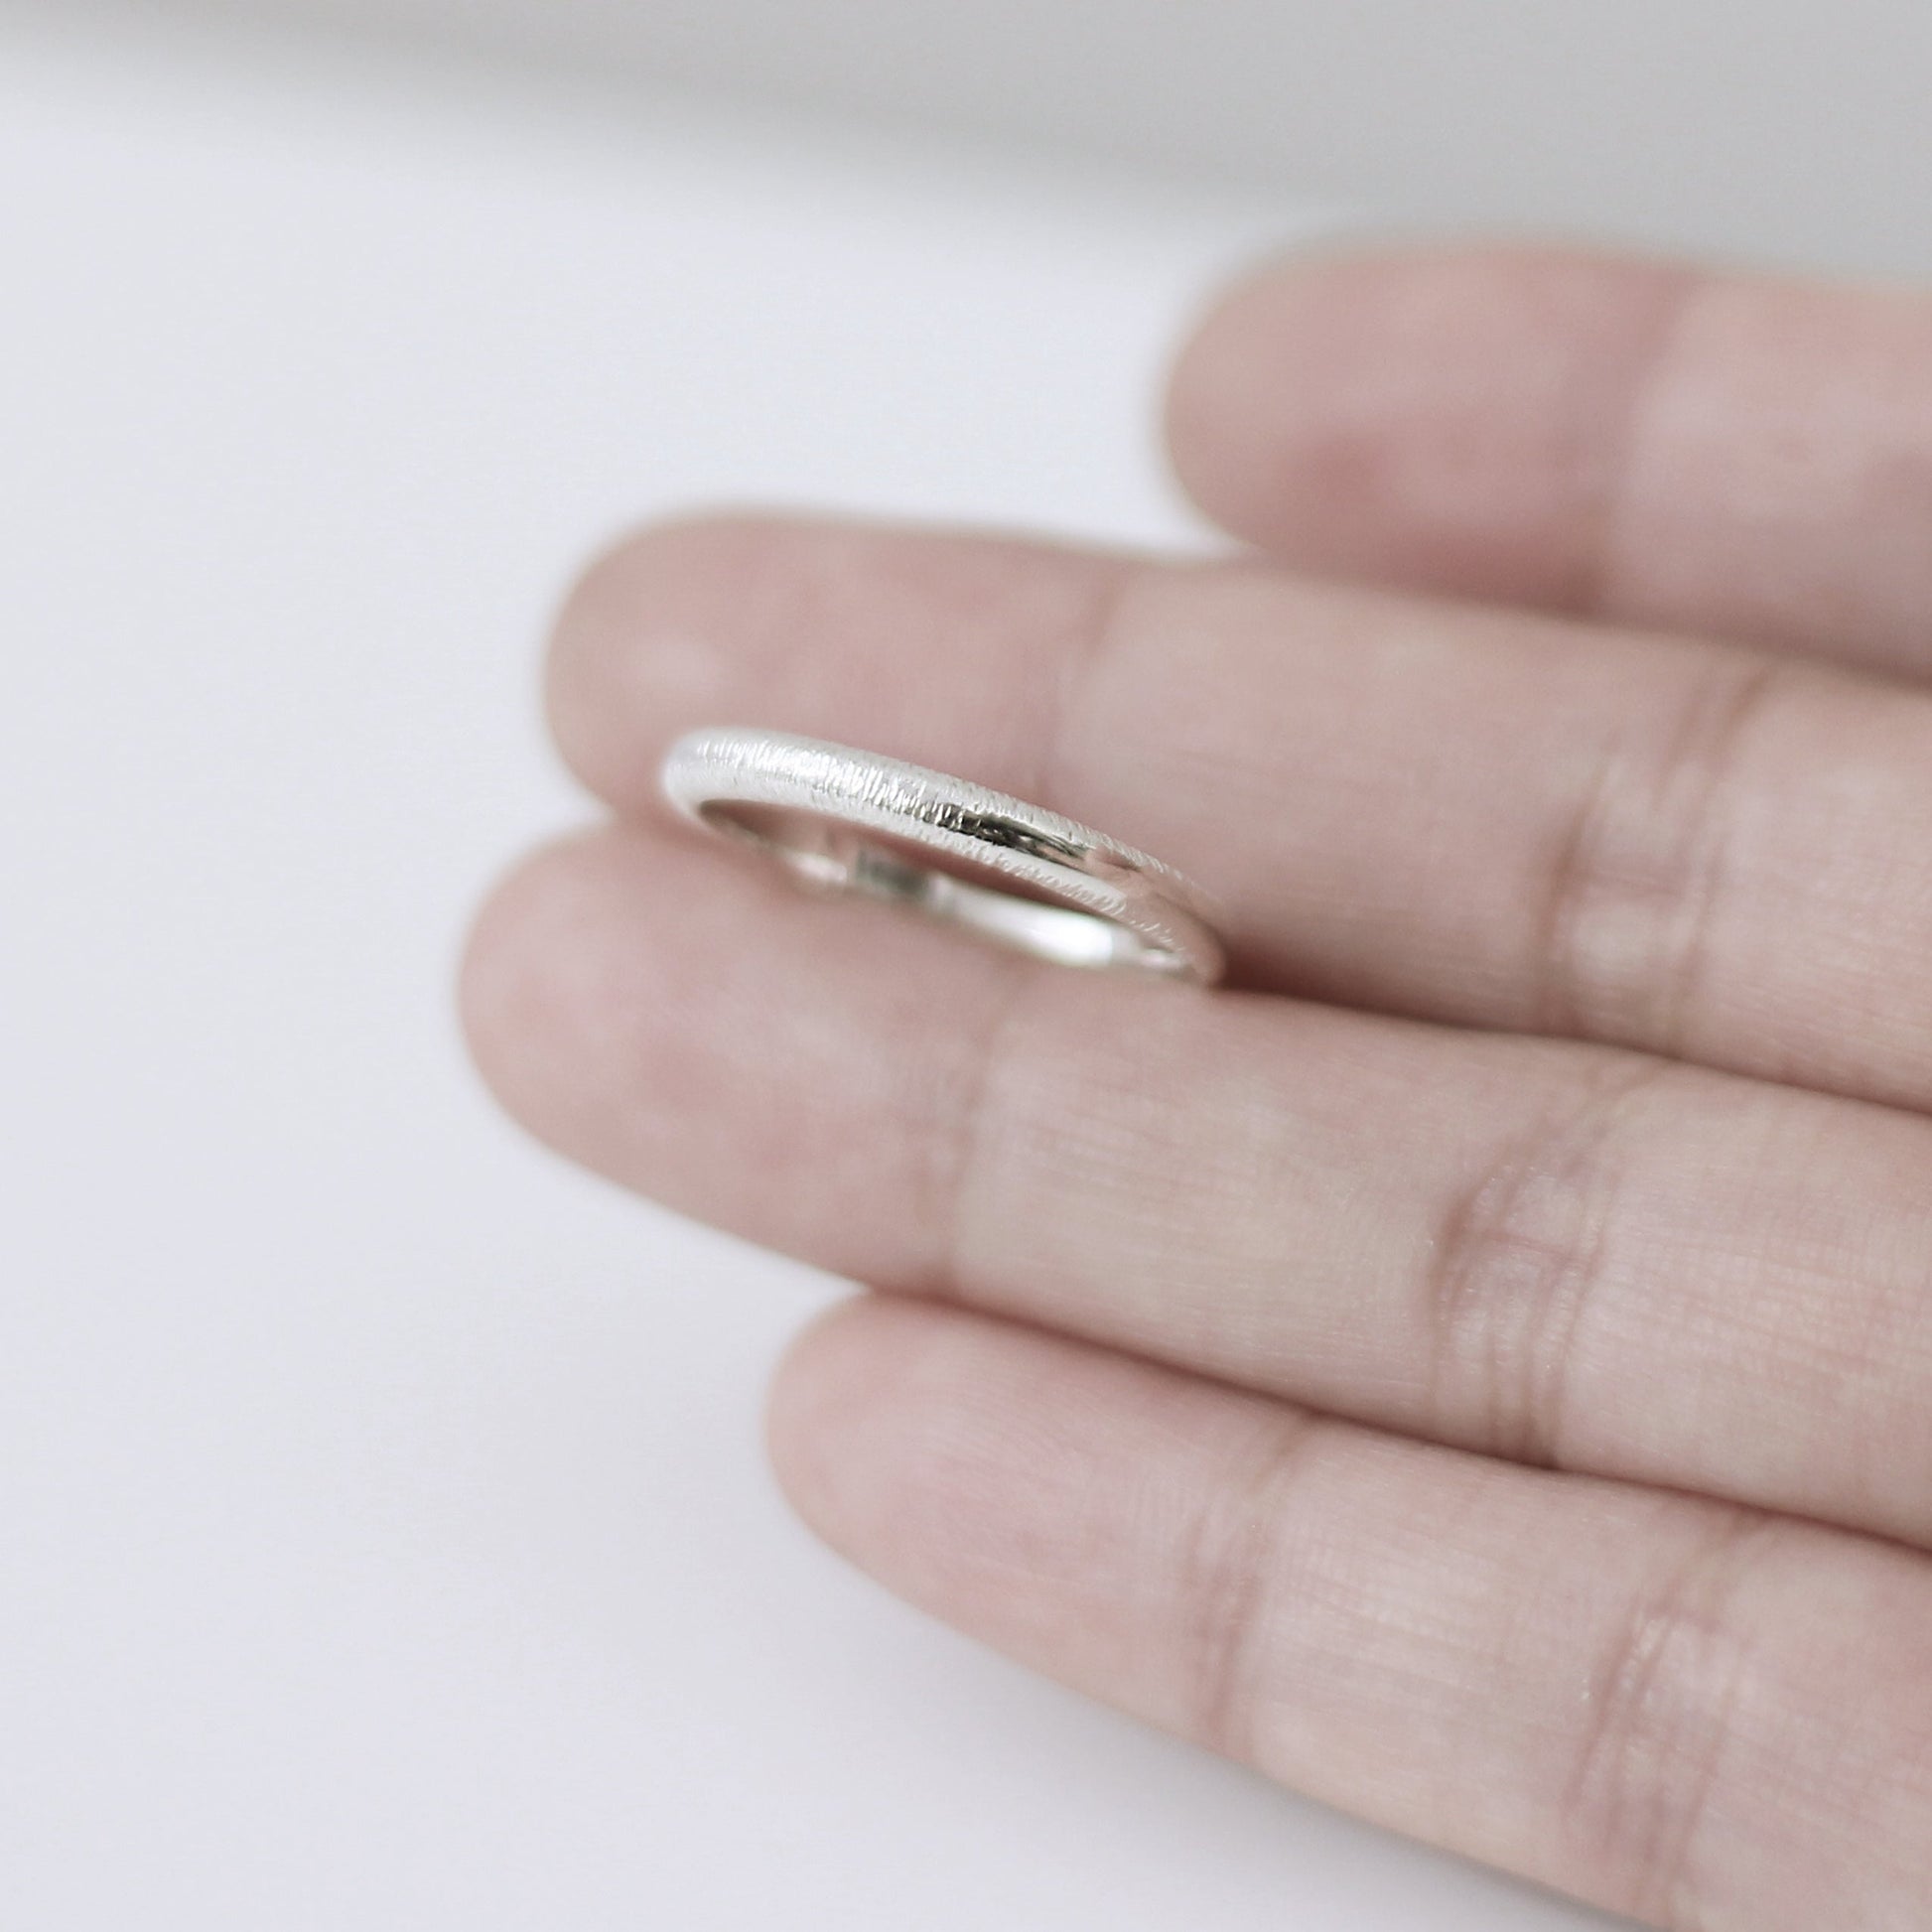 Moonlight Hammered Ring - Silver - Aisling Chou Studio